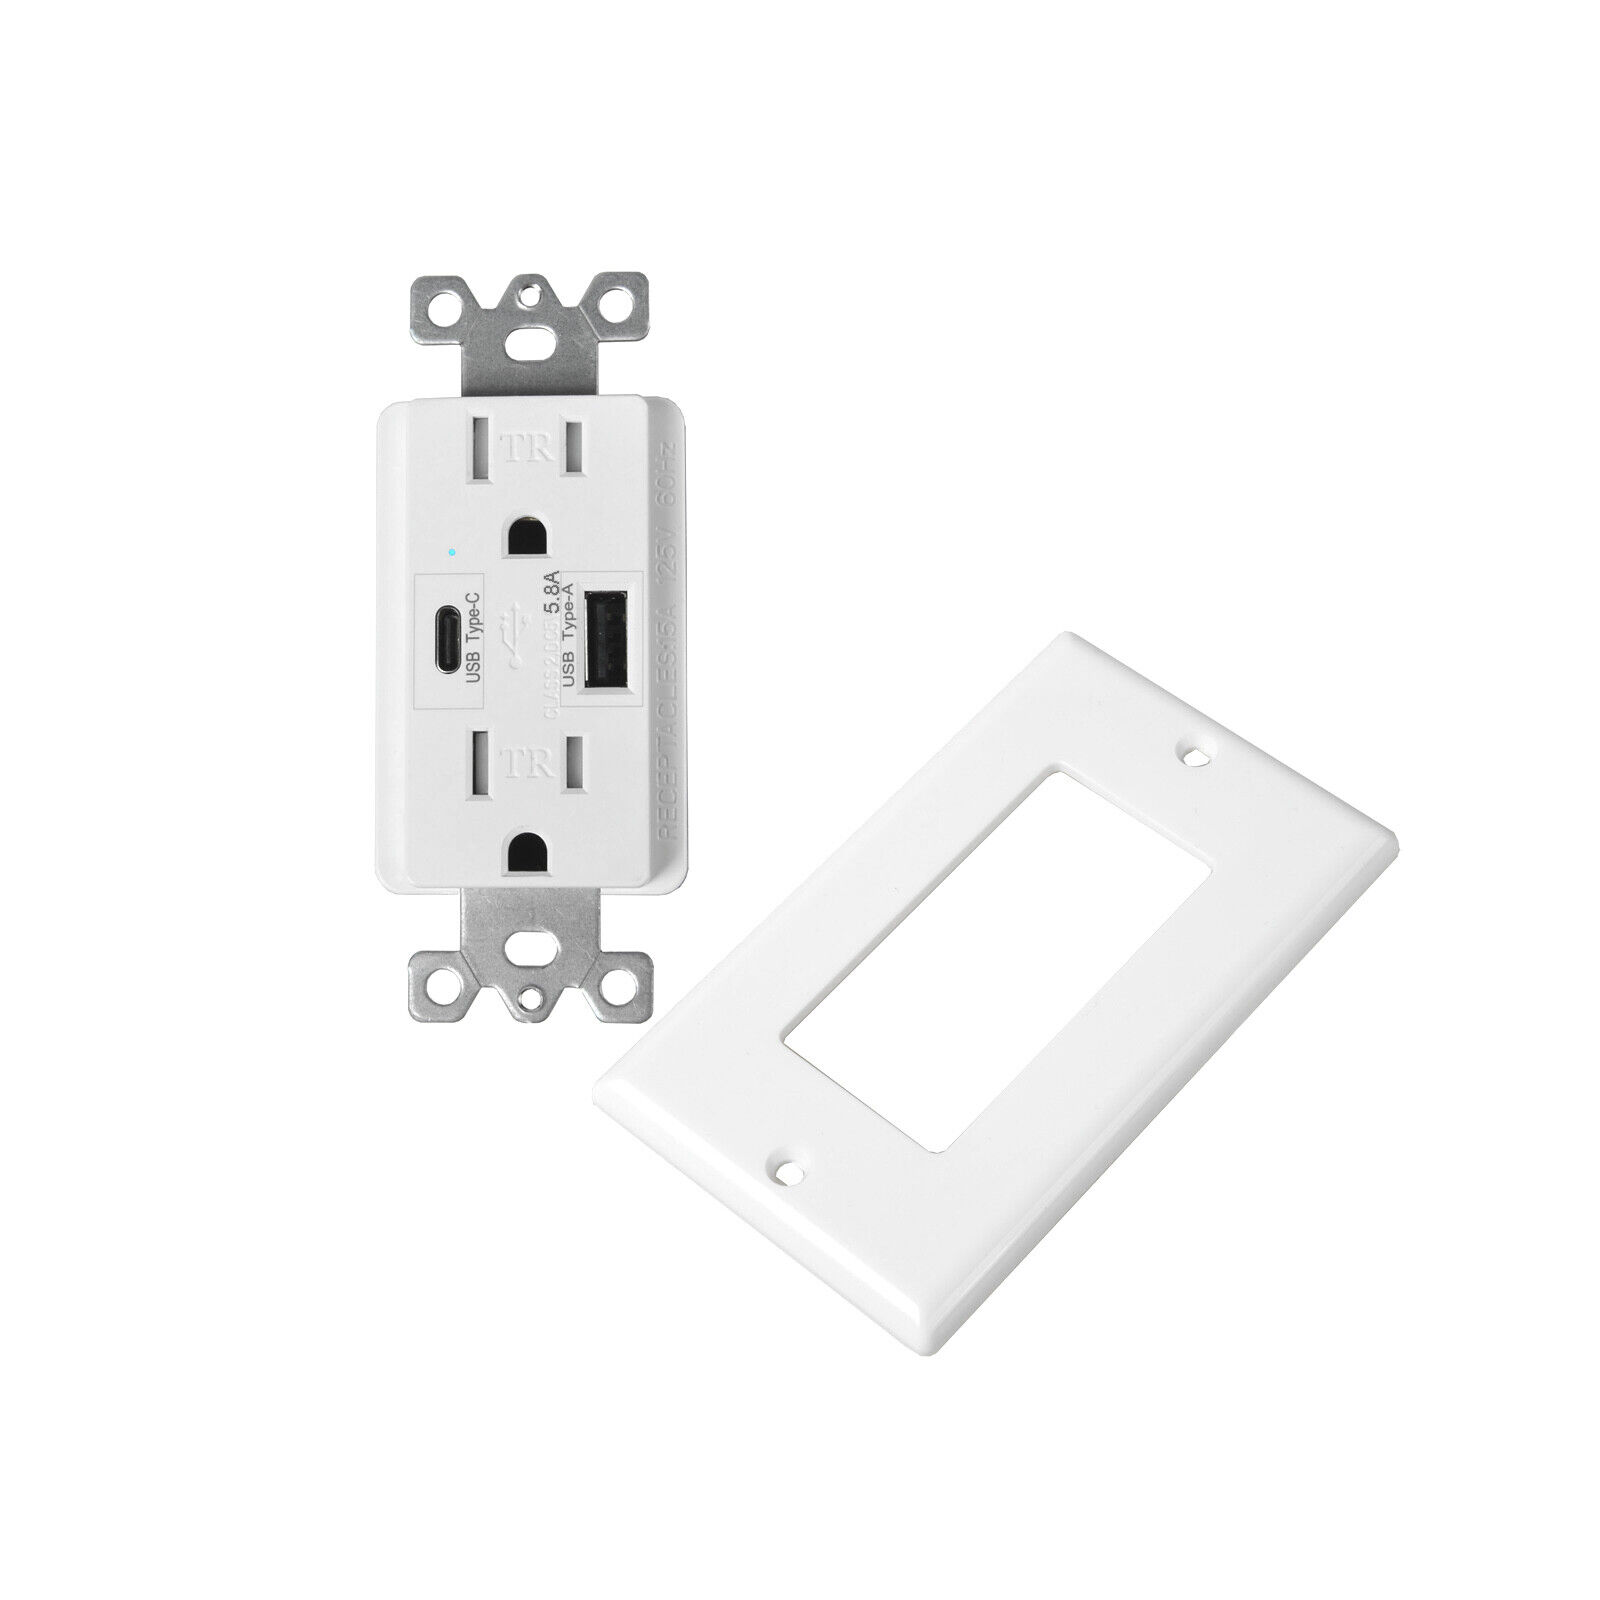 5.8A Type-C USB Charger 15A Wall AC Power Socket Outlet Duplex Receptacle White